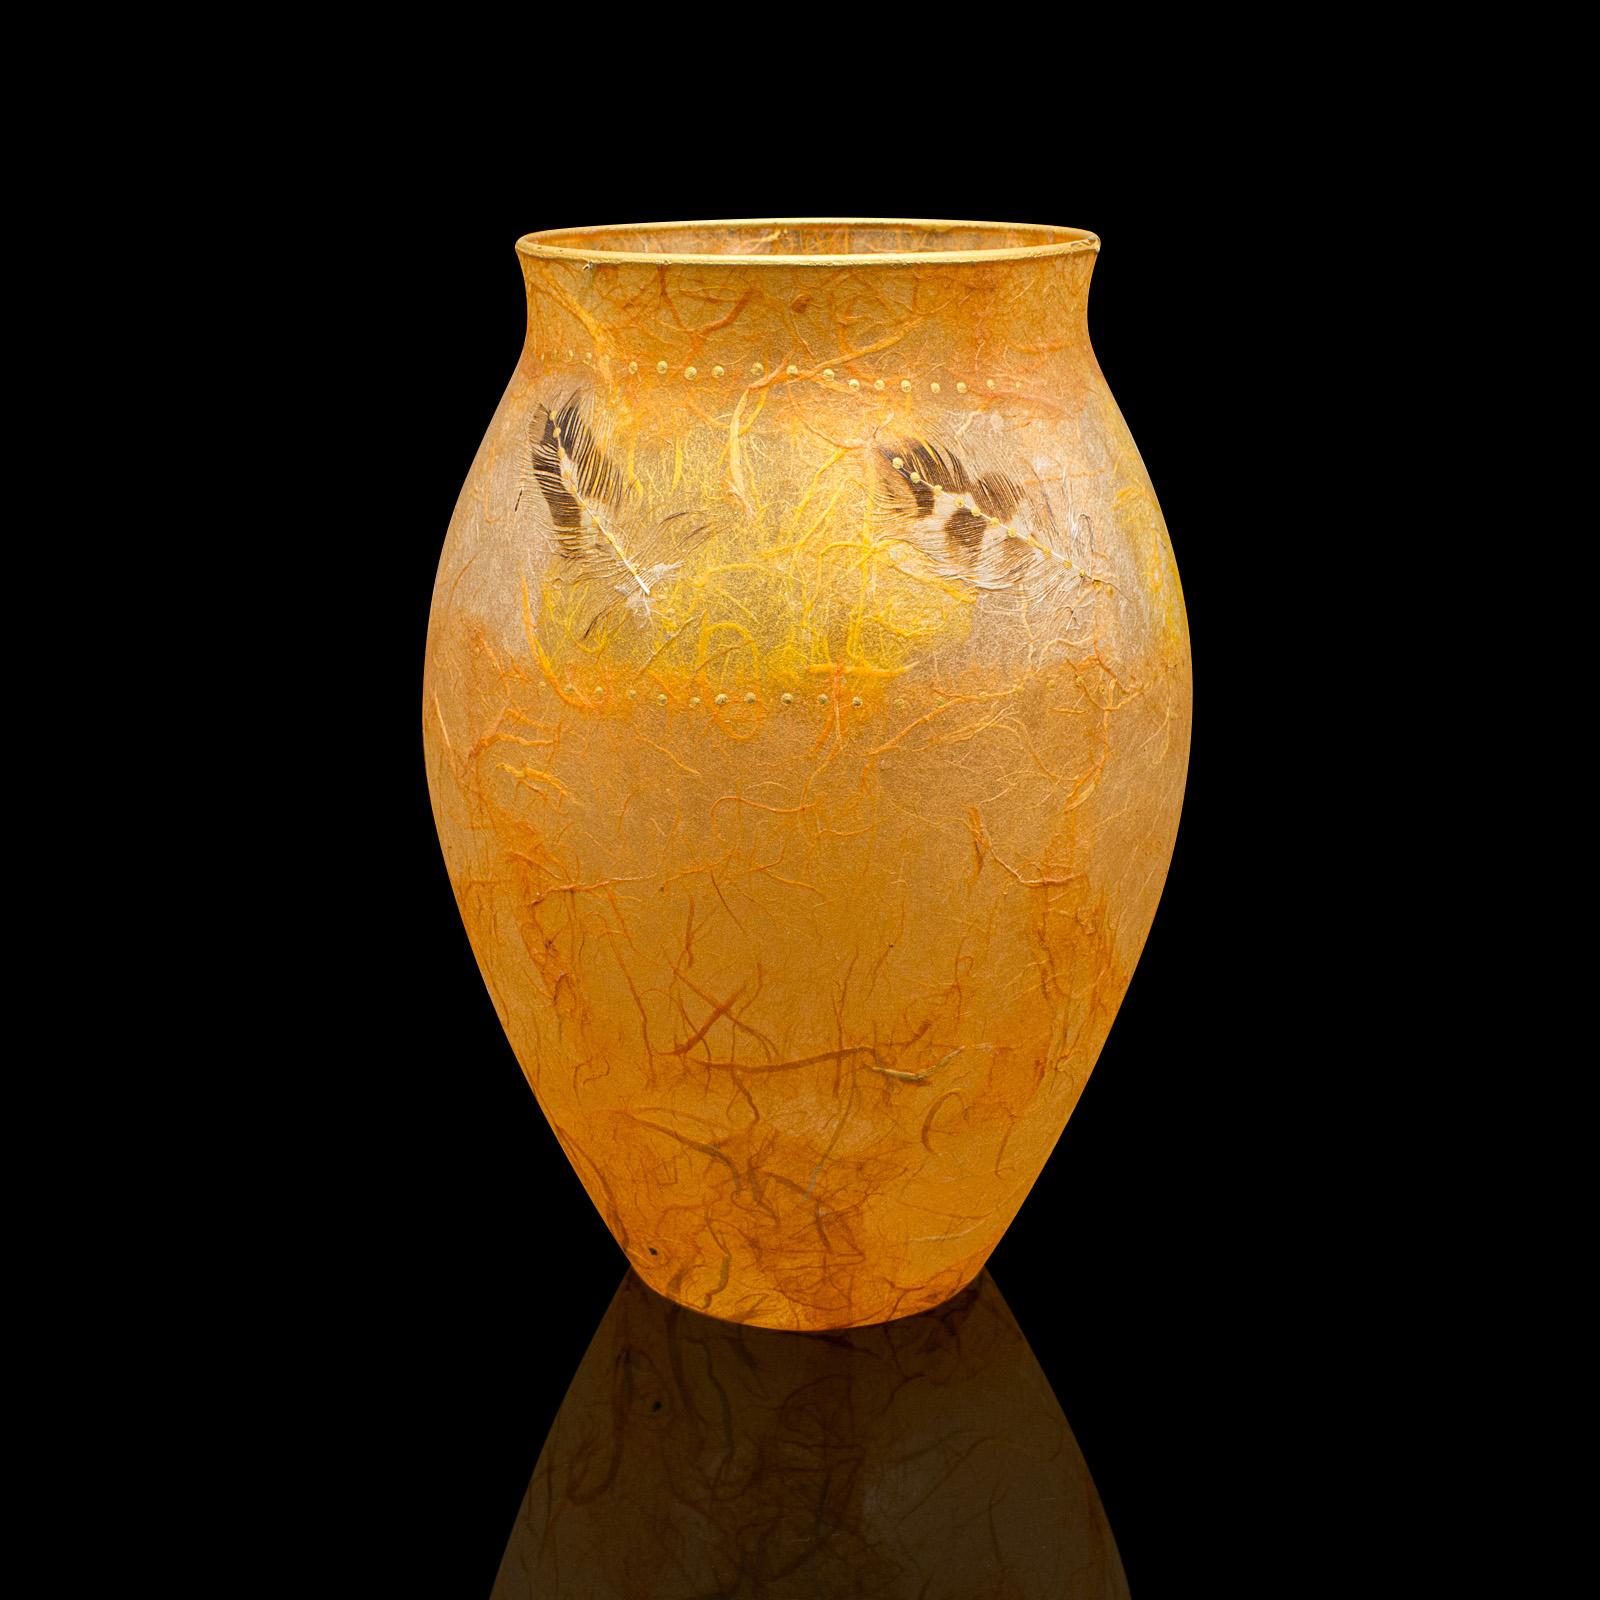 This is a contemporary decorative flower vase. An English, art glass and straw silk baluster urn by Margaret Johnson.

Appealing colour with a fascinating natural decoration
Displays a desirable, contemporary appearance
Eye-catching glass beams in